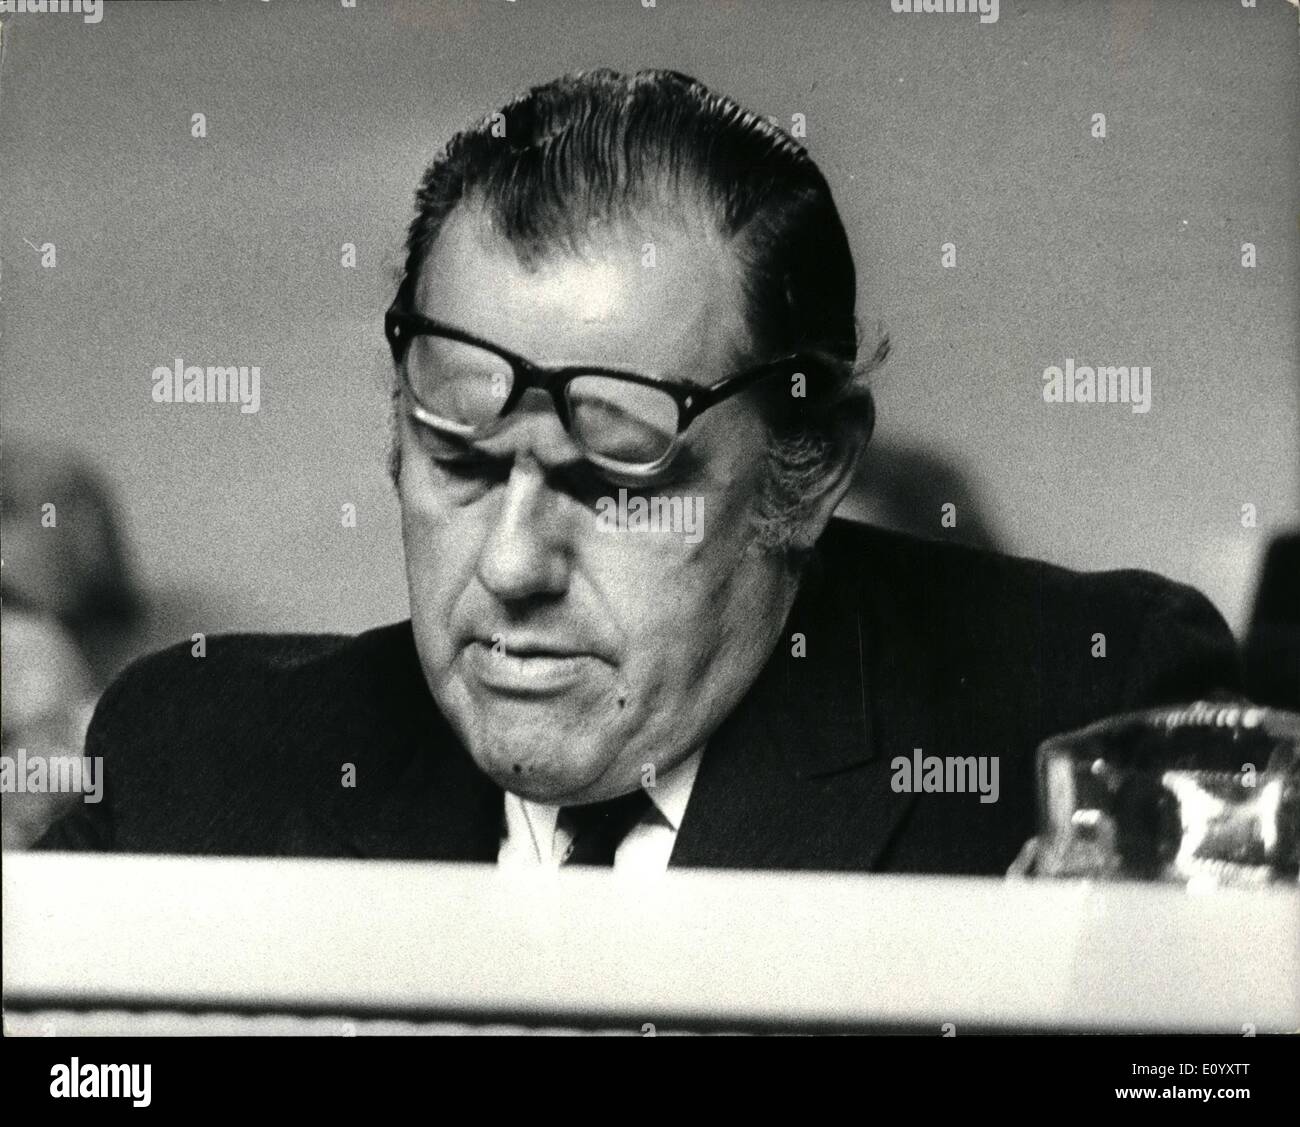 Oct. 10, 1971 - The Conservative Party Conference at Brighton; The conservative party Conferences at Brighton today called for the reintroduction of the death penalty for the murderers of policemen and prison officers. Photo Shows With his spectacles resting on his forsheed Mr. Reginald Maudling, the Home Secretary listens as the Tories demand the return of the death penalty. Stock Photo